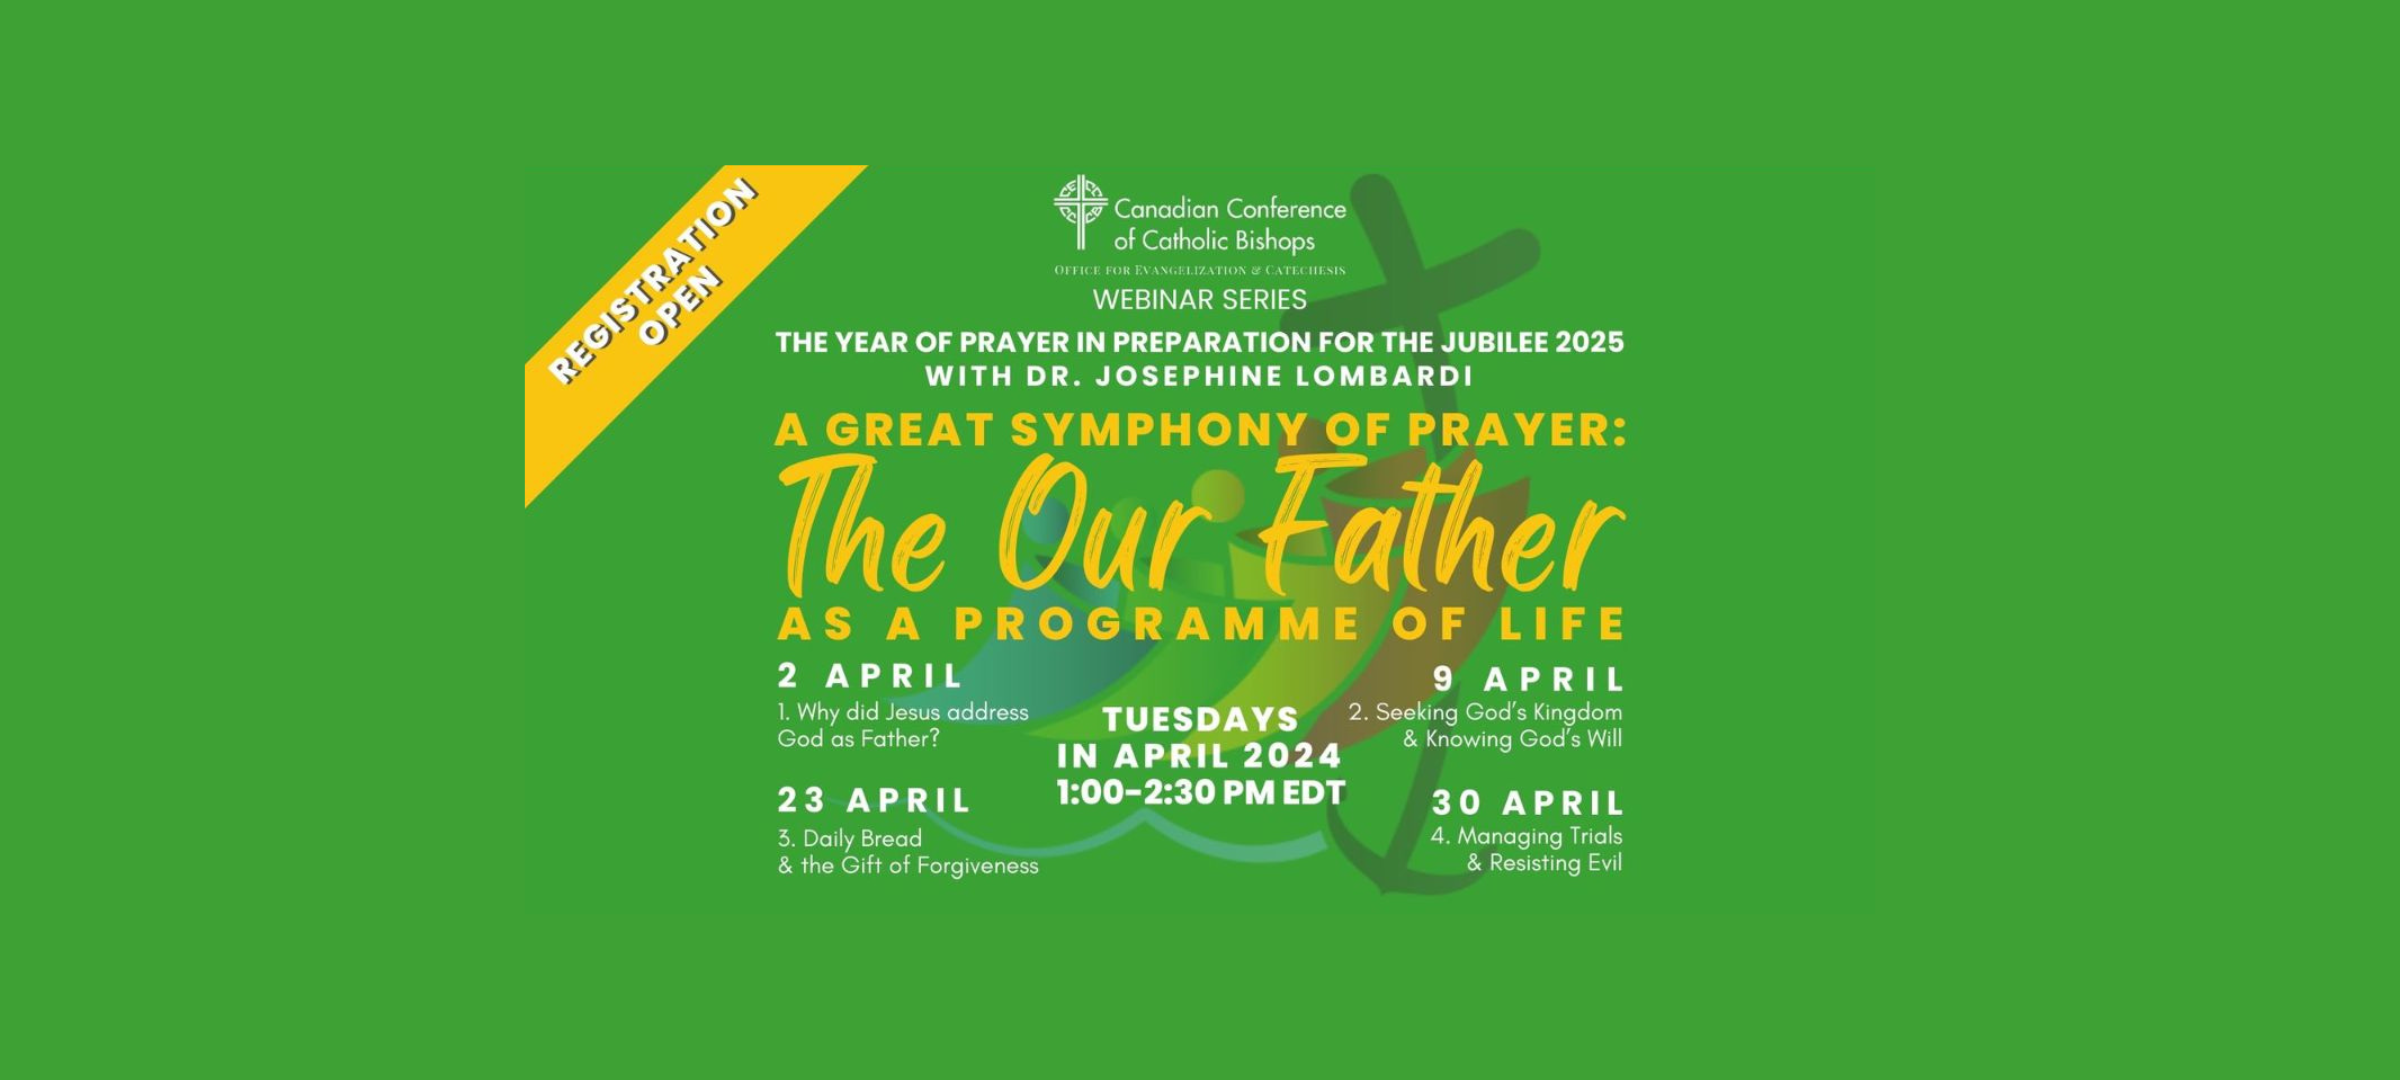 Webinar Series Starts Next Week: "A Great Symphony of Prayer: The Our Father as a Programme of Life"